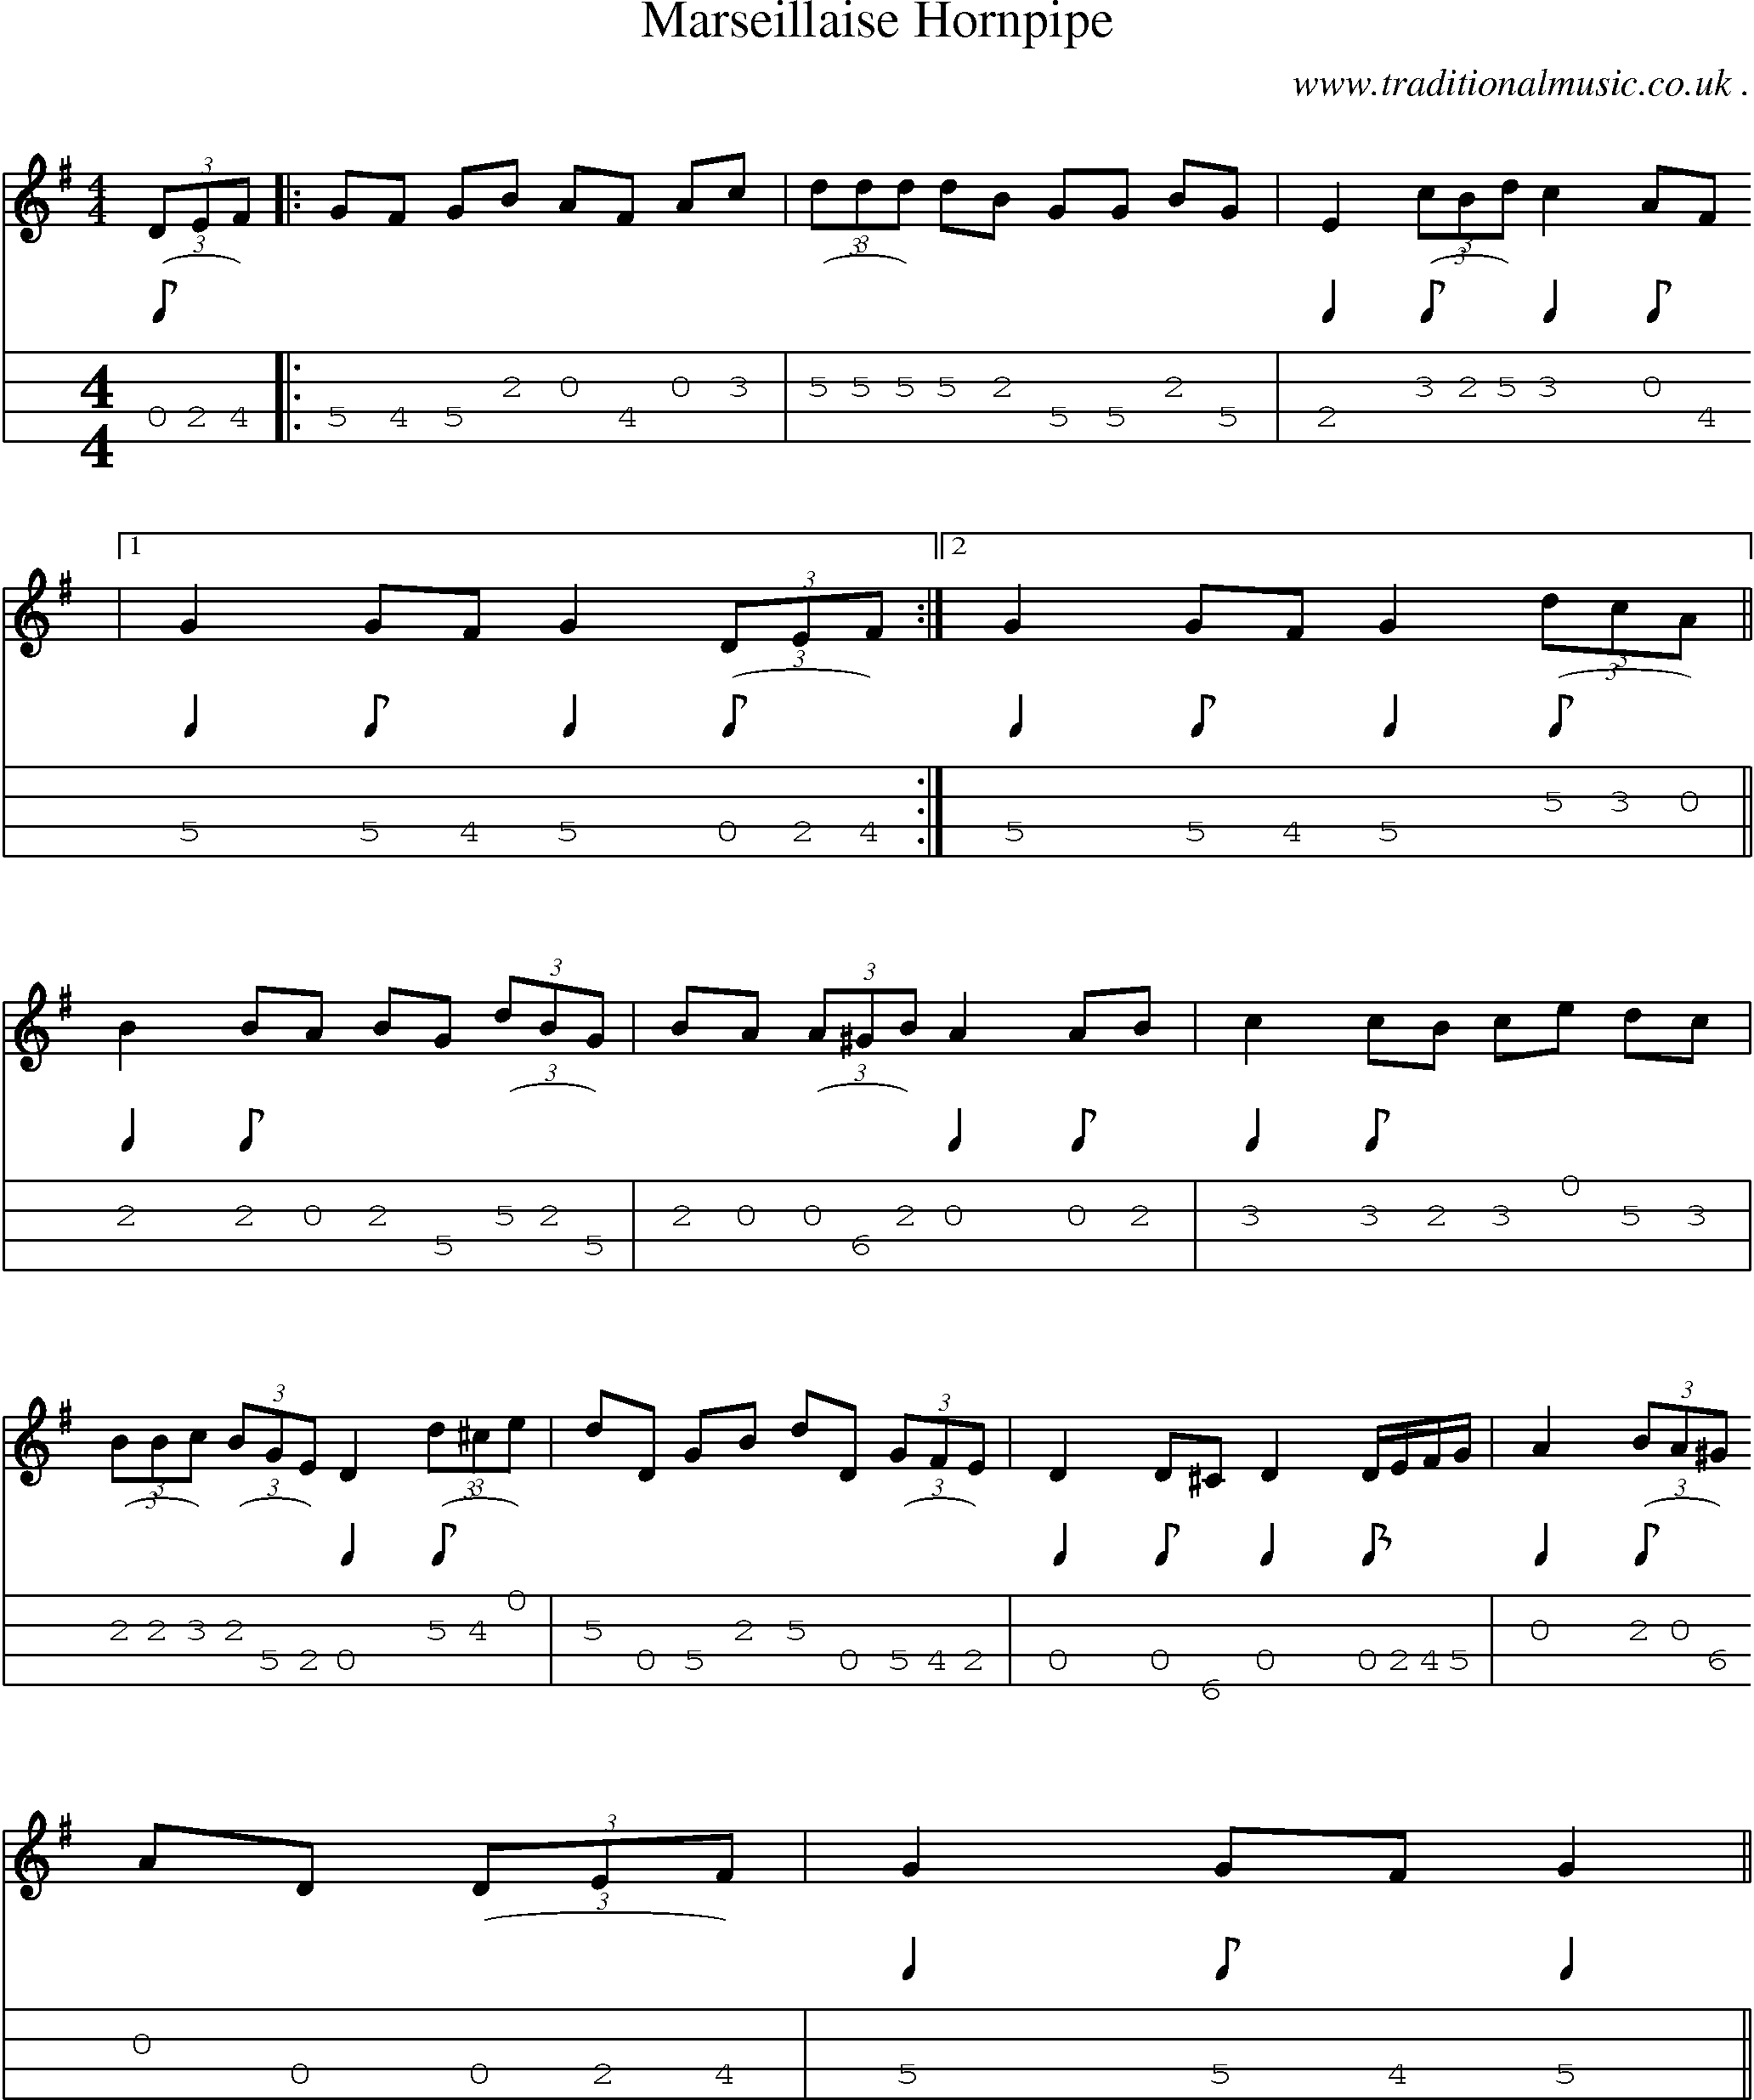 Sheet-Music and Mandolin Tabs for Marseillaise Hornpipe